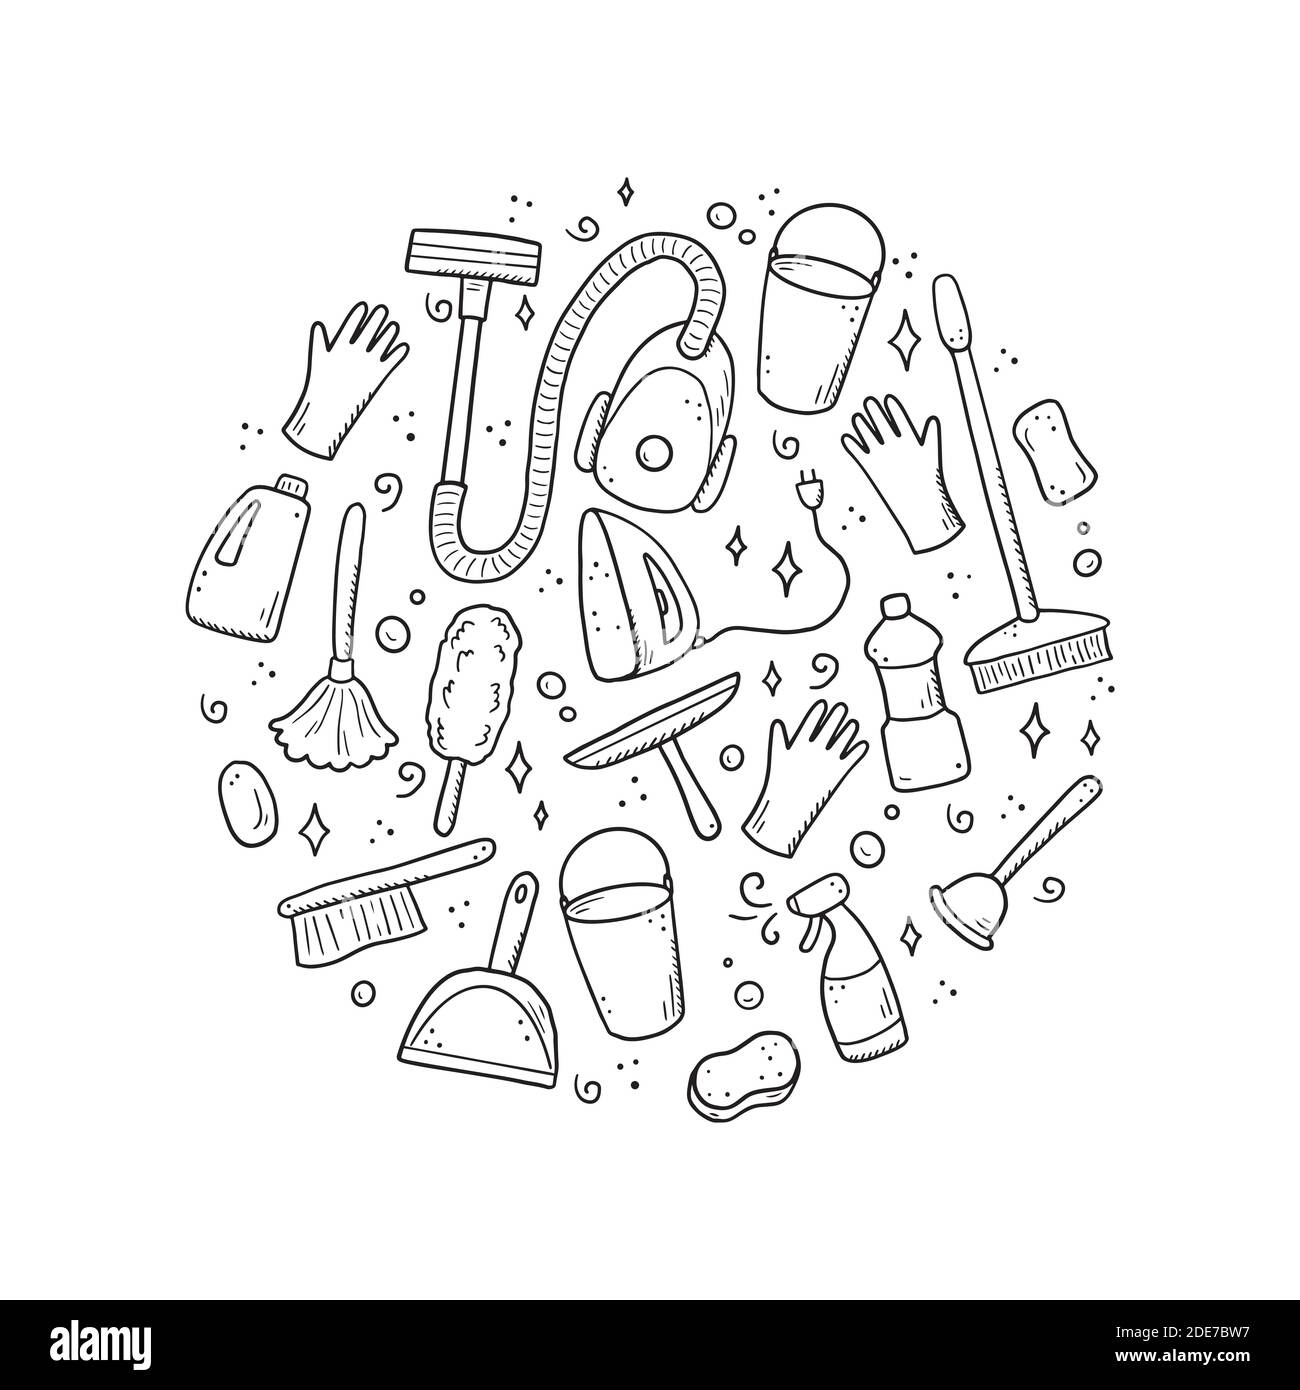 Hand drawn set of cleaning equipments, sponge, vacuum, spray, broom, bucket. Comic doodle sketch style. Clean element drawn by digital brush-pen. Illustration for icon, frame, background. Stock Vector